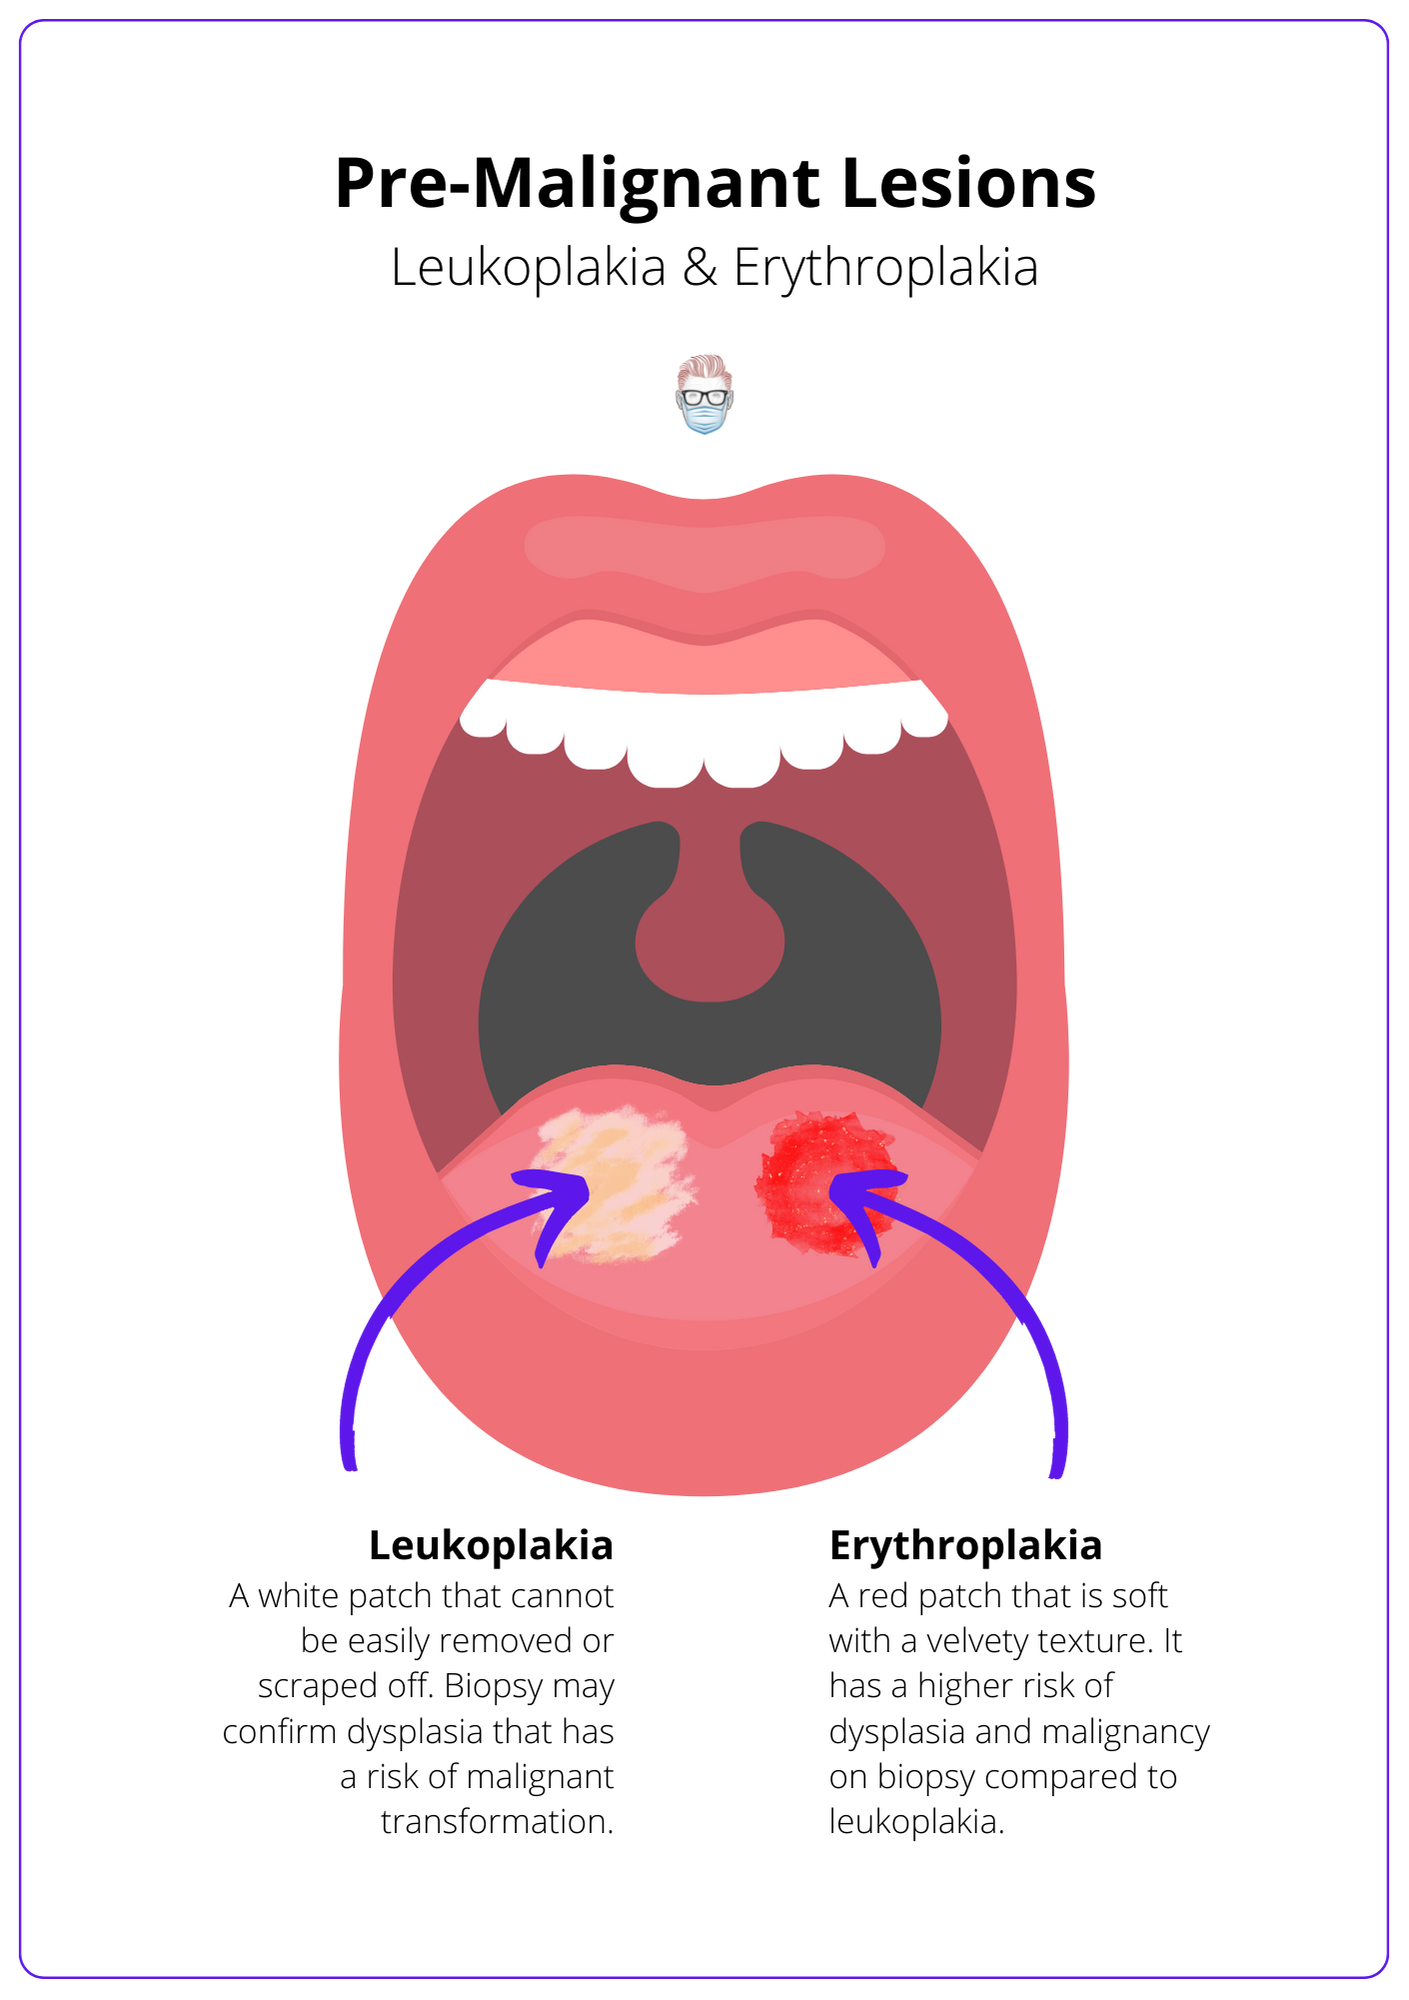 Leukoplakia and Erythroplakia are premalignant lesions for oral cavity tumours, SCCs and squamous cell cancers